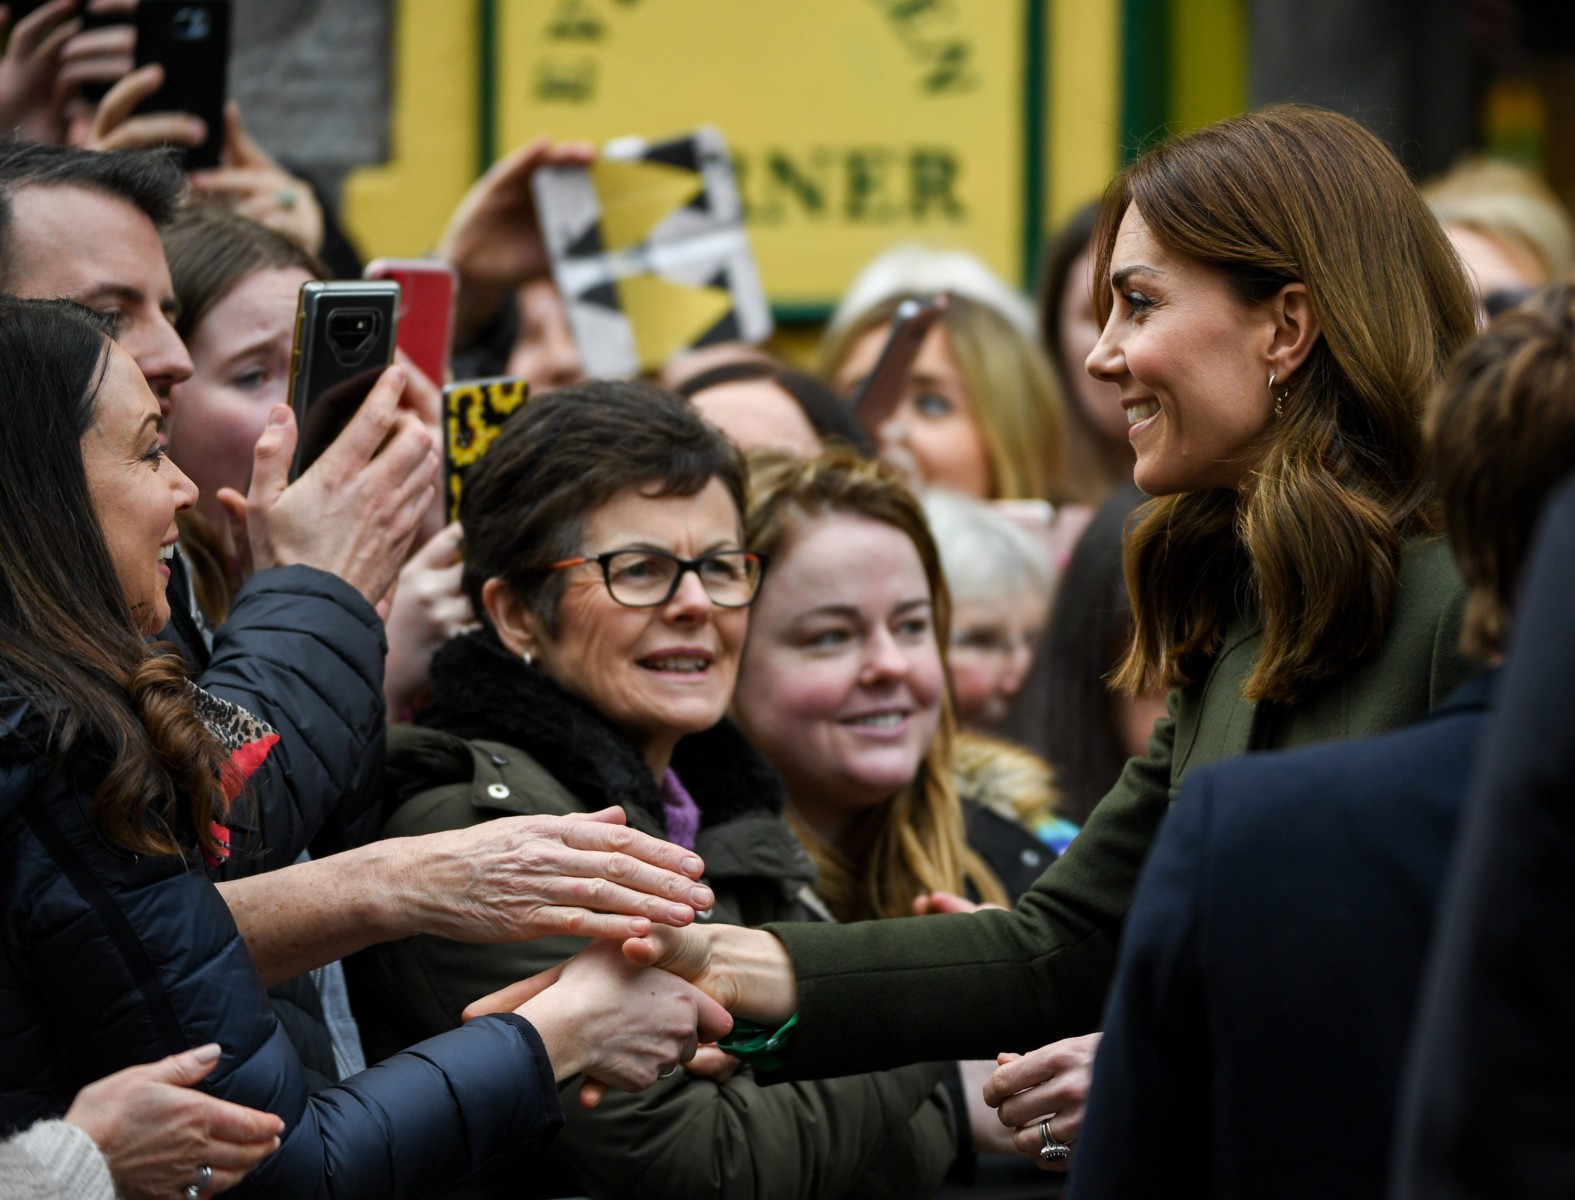 Kate Middleton shook hands with locals in Ireland during a tour earlier this week